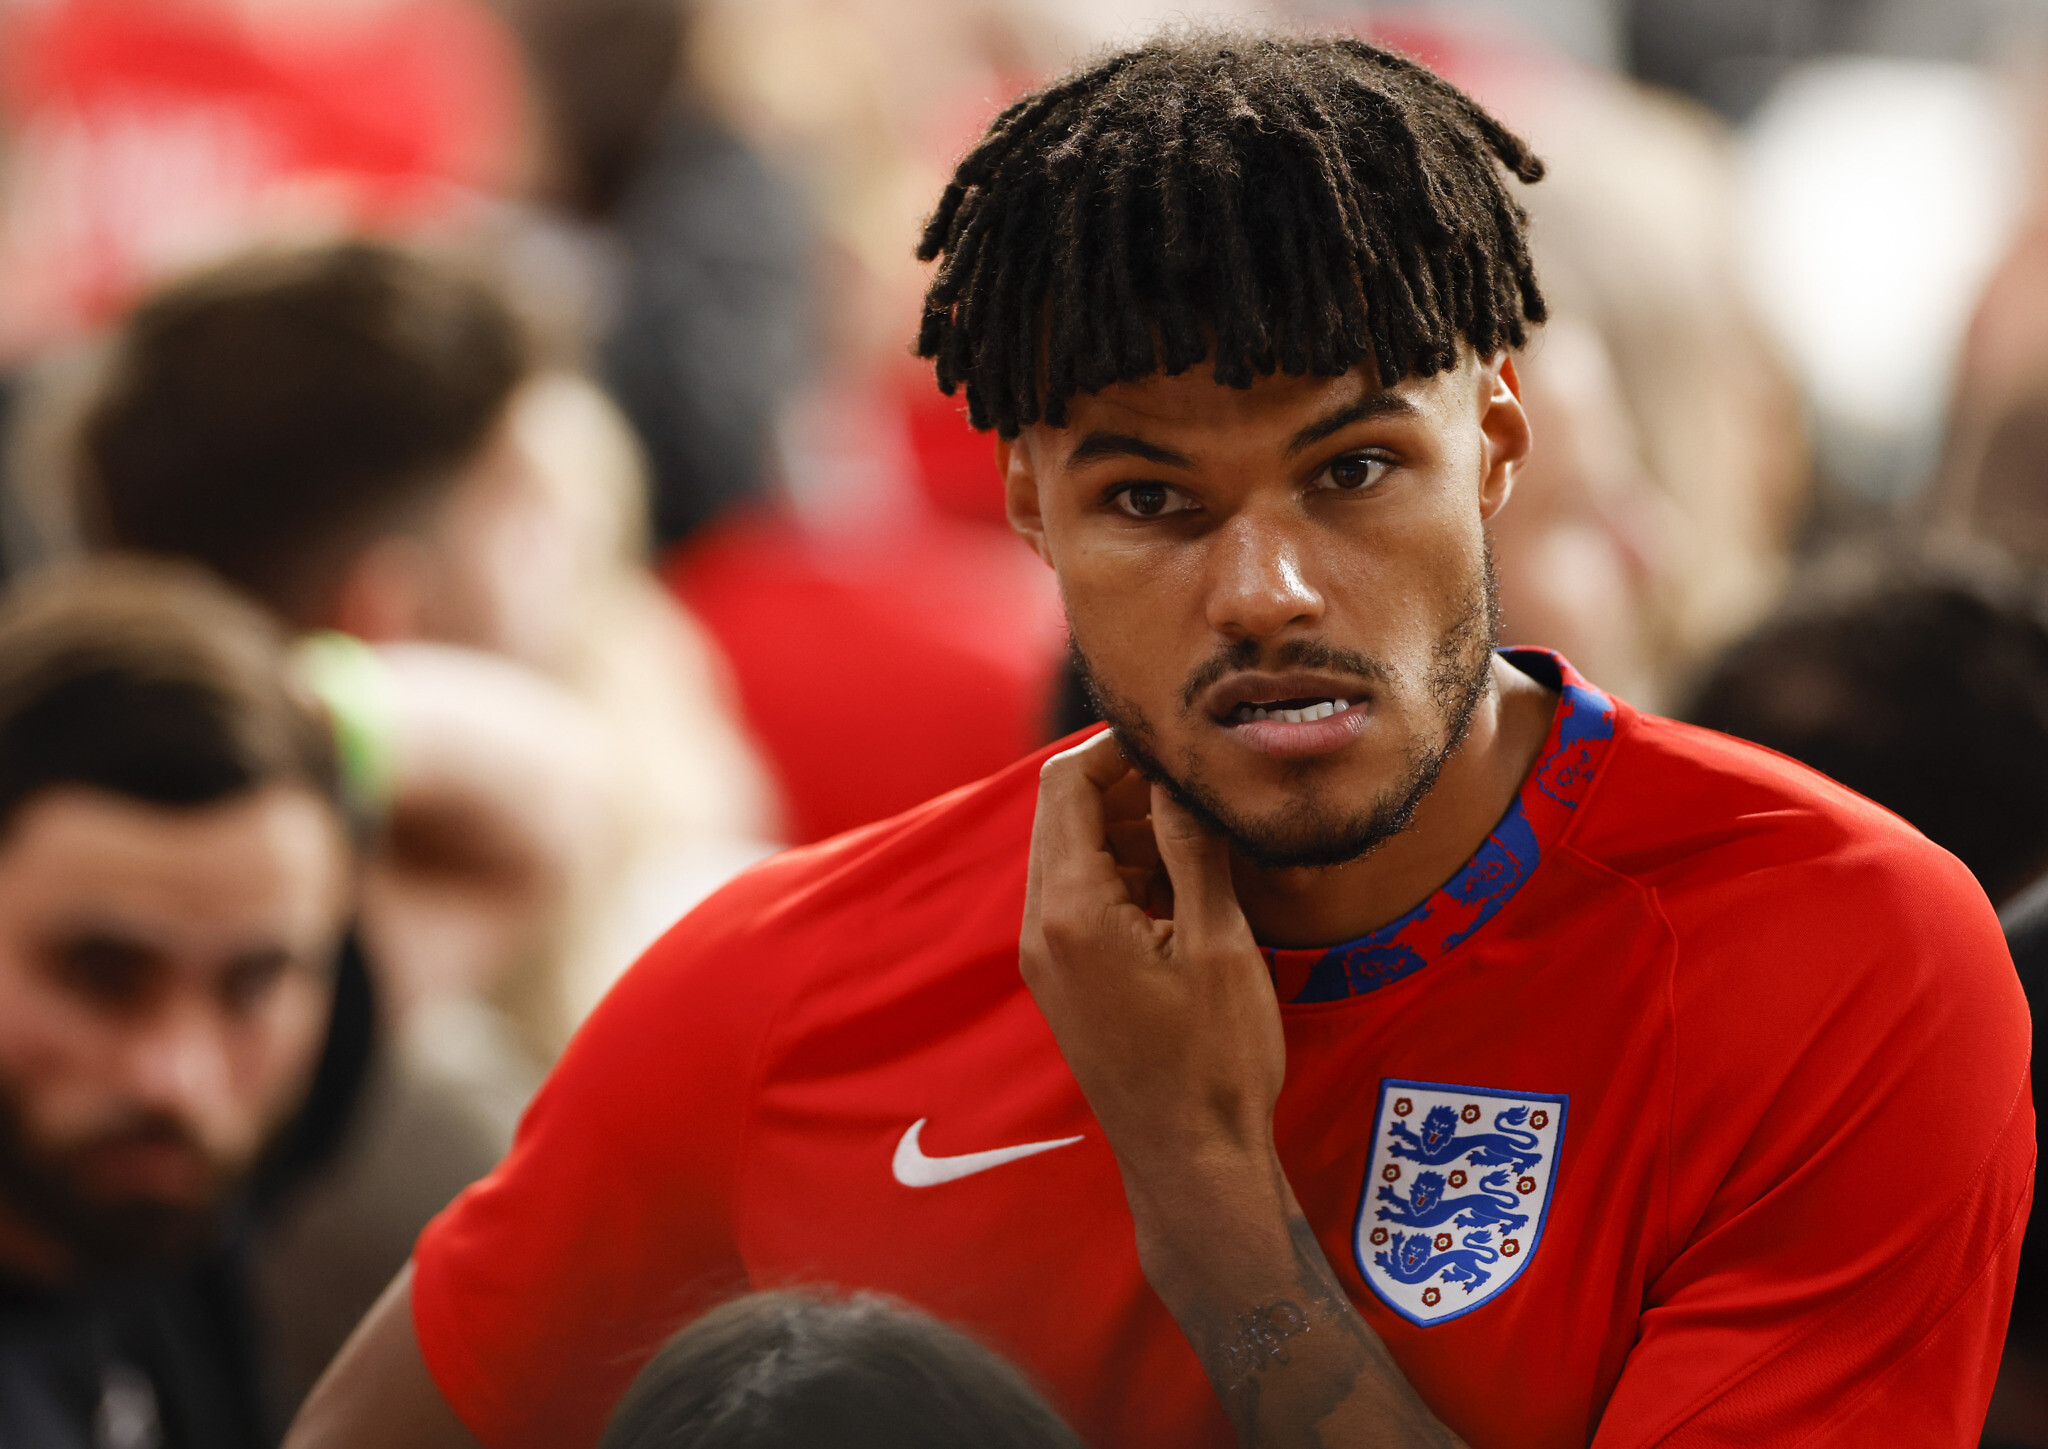 Wave of online racism toward soccer stars forces U.K. government to listen  - National